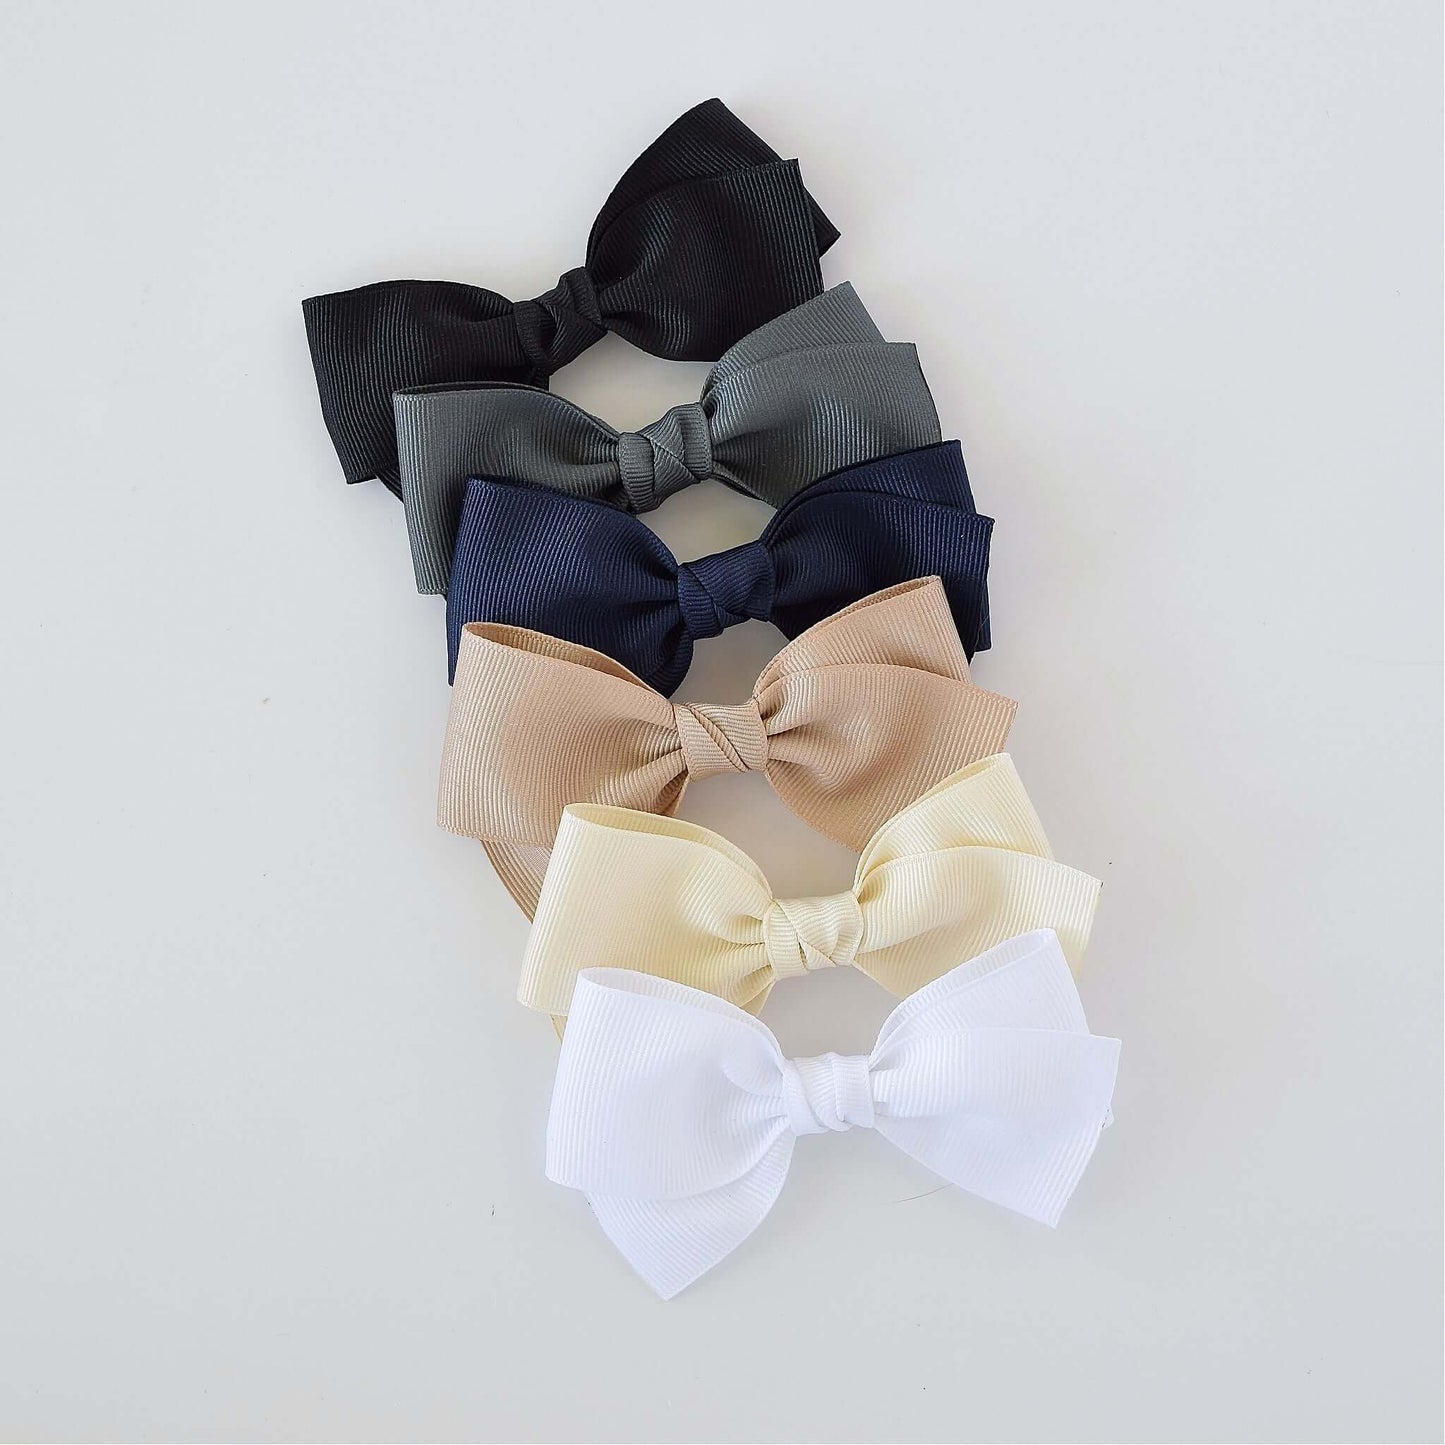 Six 4-inch grosgrain baby Kayla bow clips in black, gray, navy, taupe, ivory, and white. Versatile hair accessories for girls of any age.